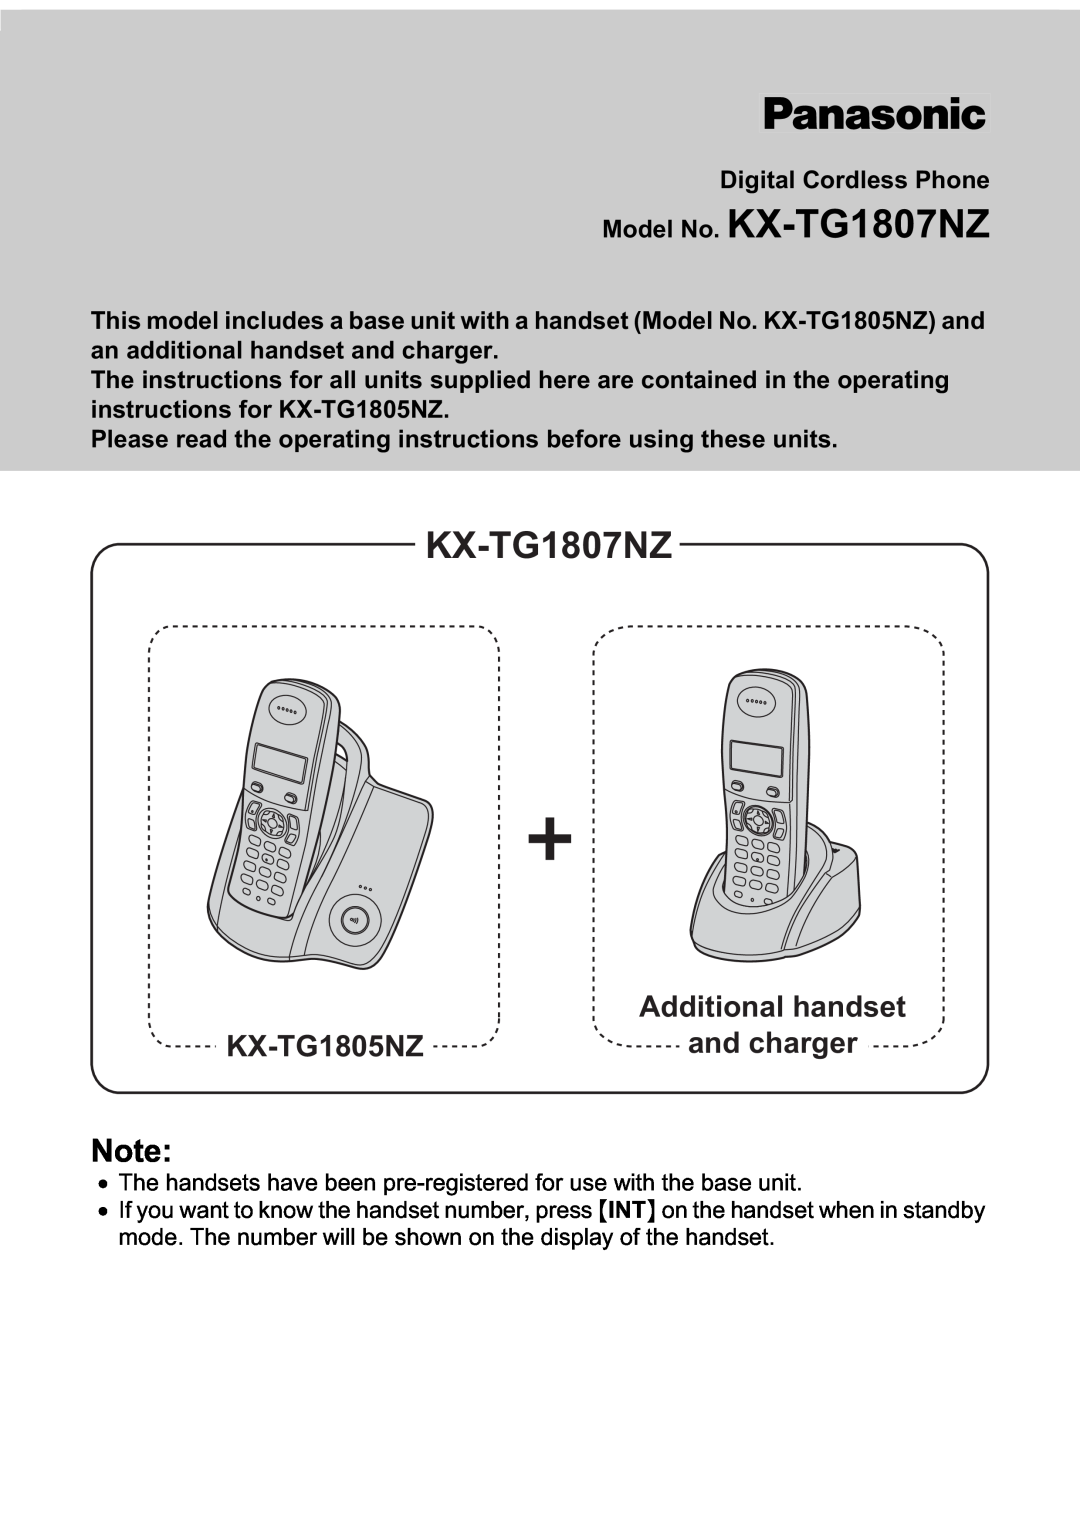 Panasonic operating instructions Model No. KX-TG1807NZ, Additional handset, KX-TG1805NZ, and charger 